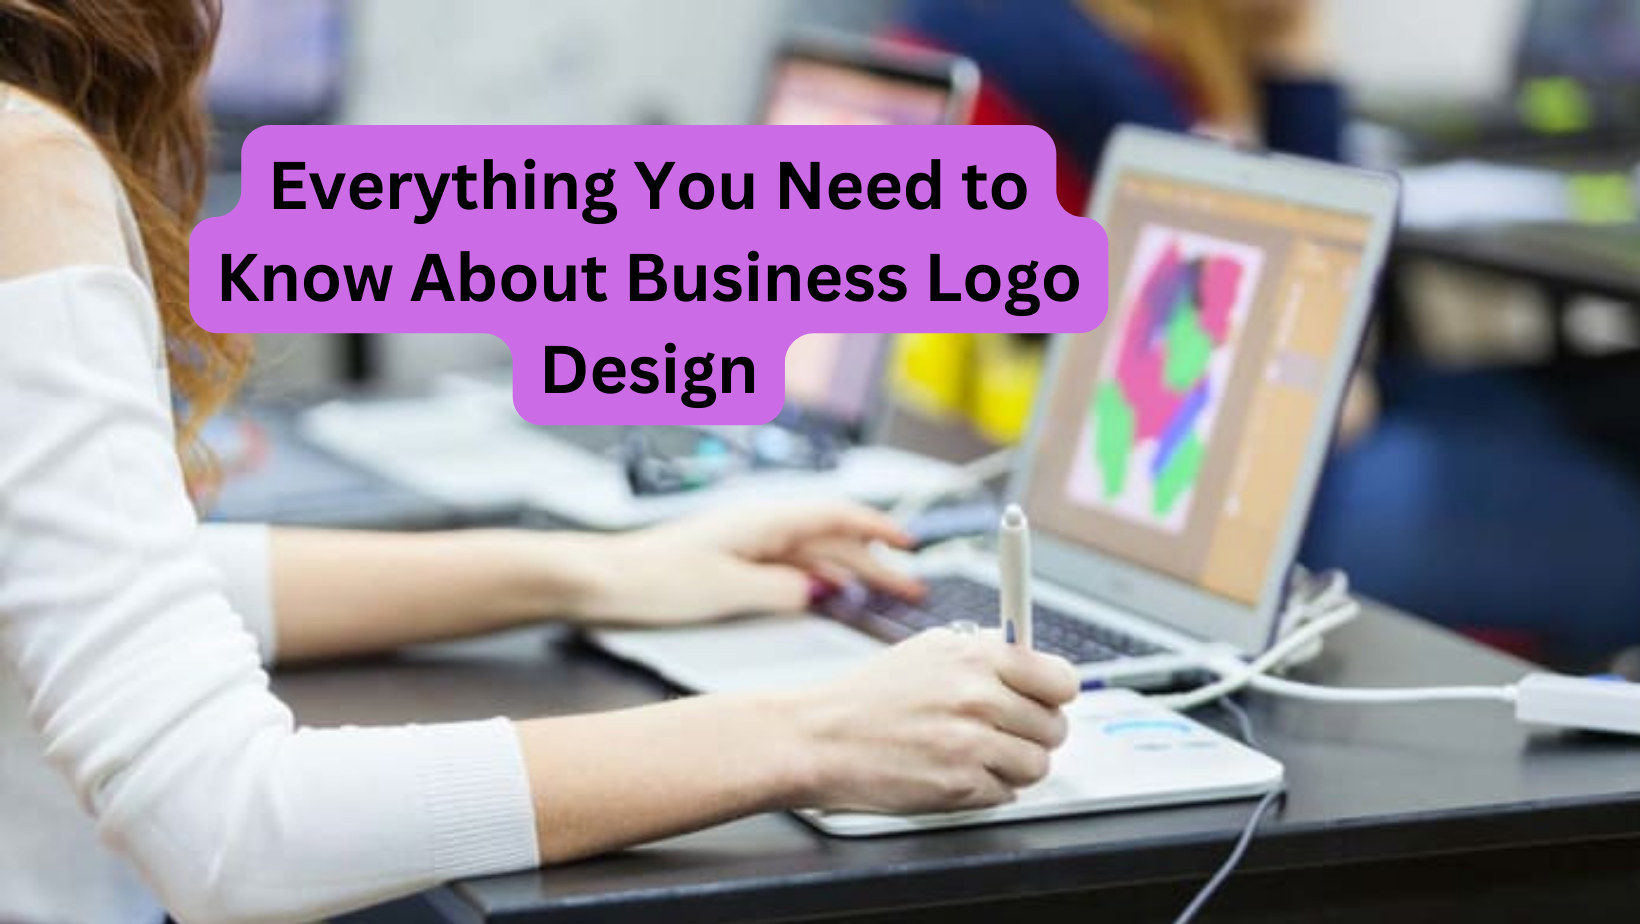 Everything You Need to Know About Business Logo Design